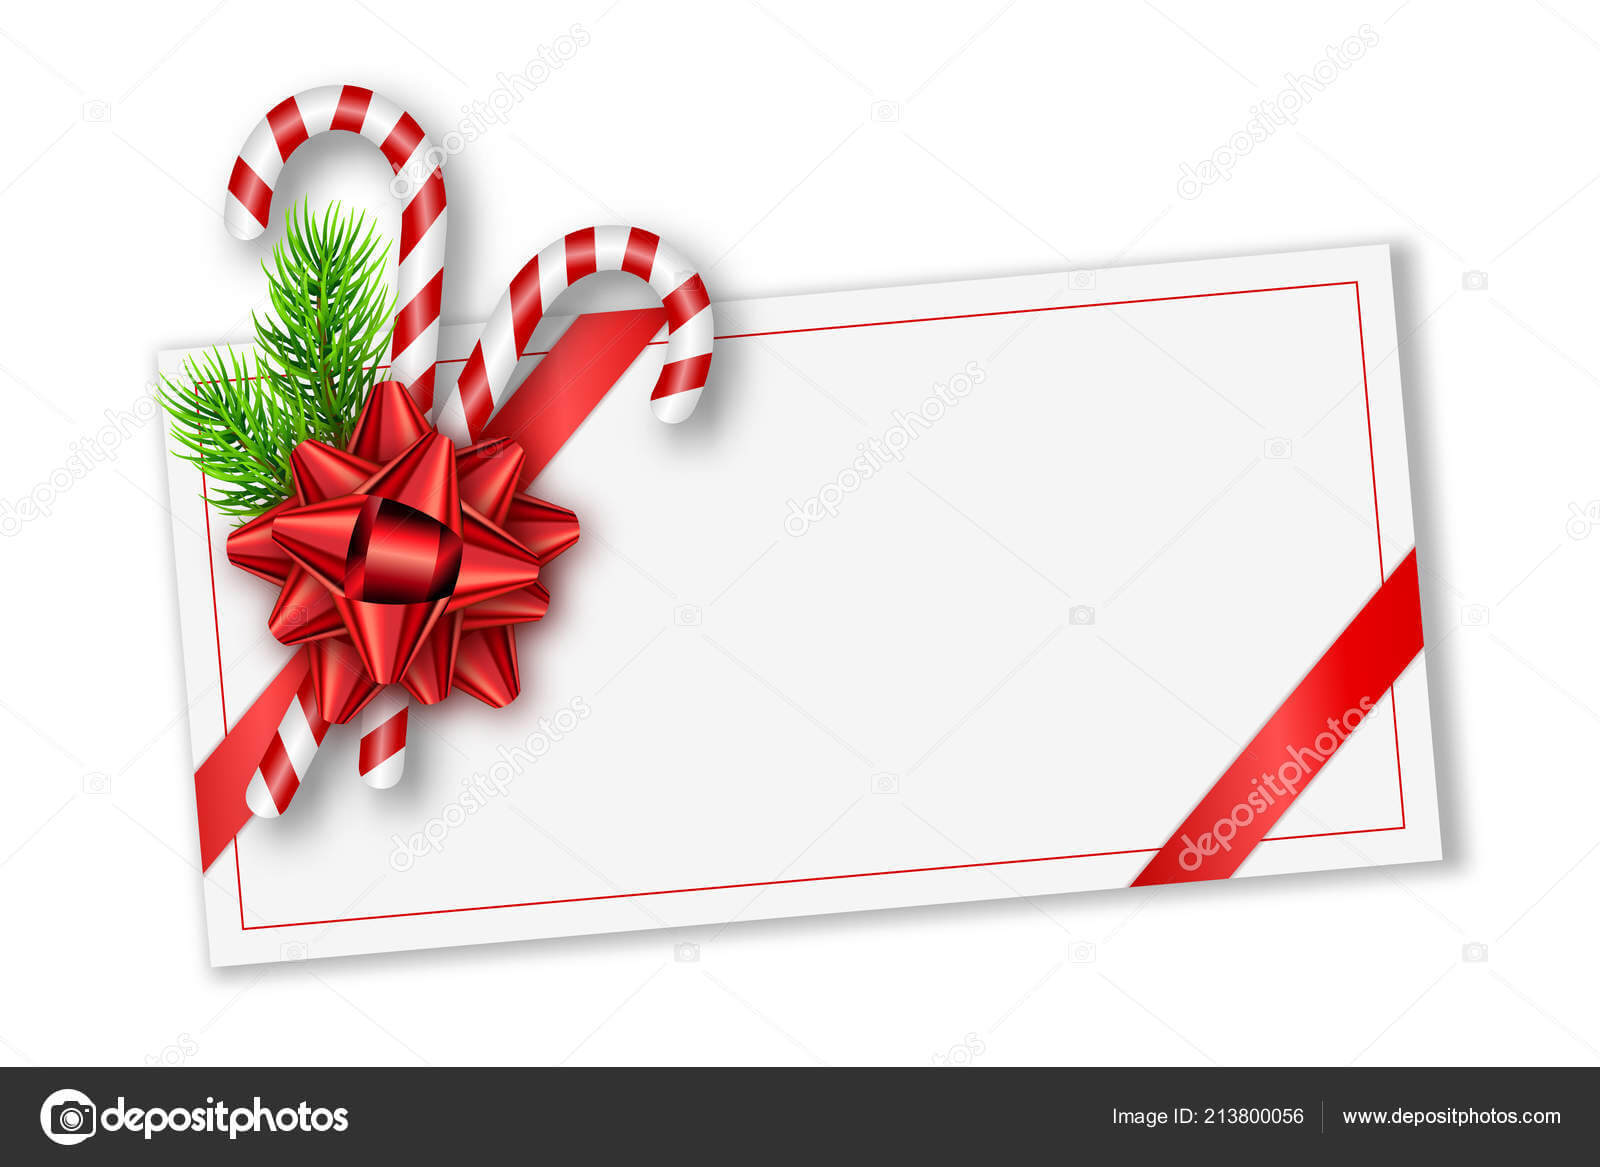 holiday-christmas-gift-card-with-red-bow-fir-tree-branches-inside